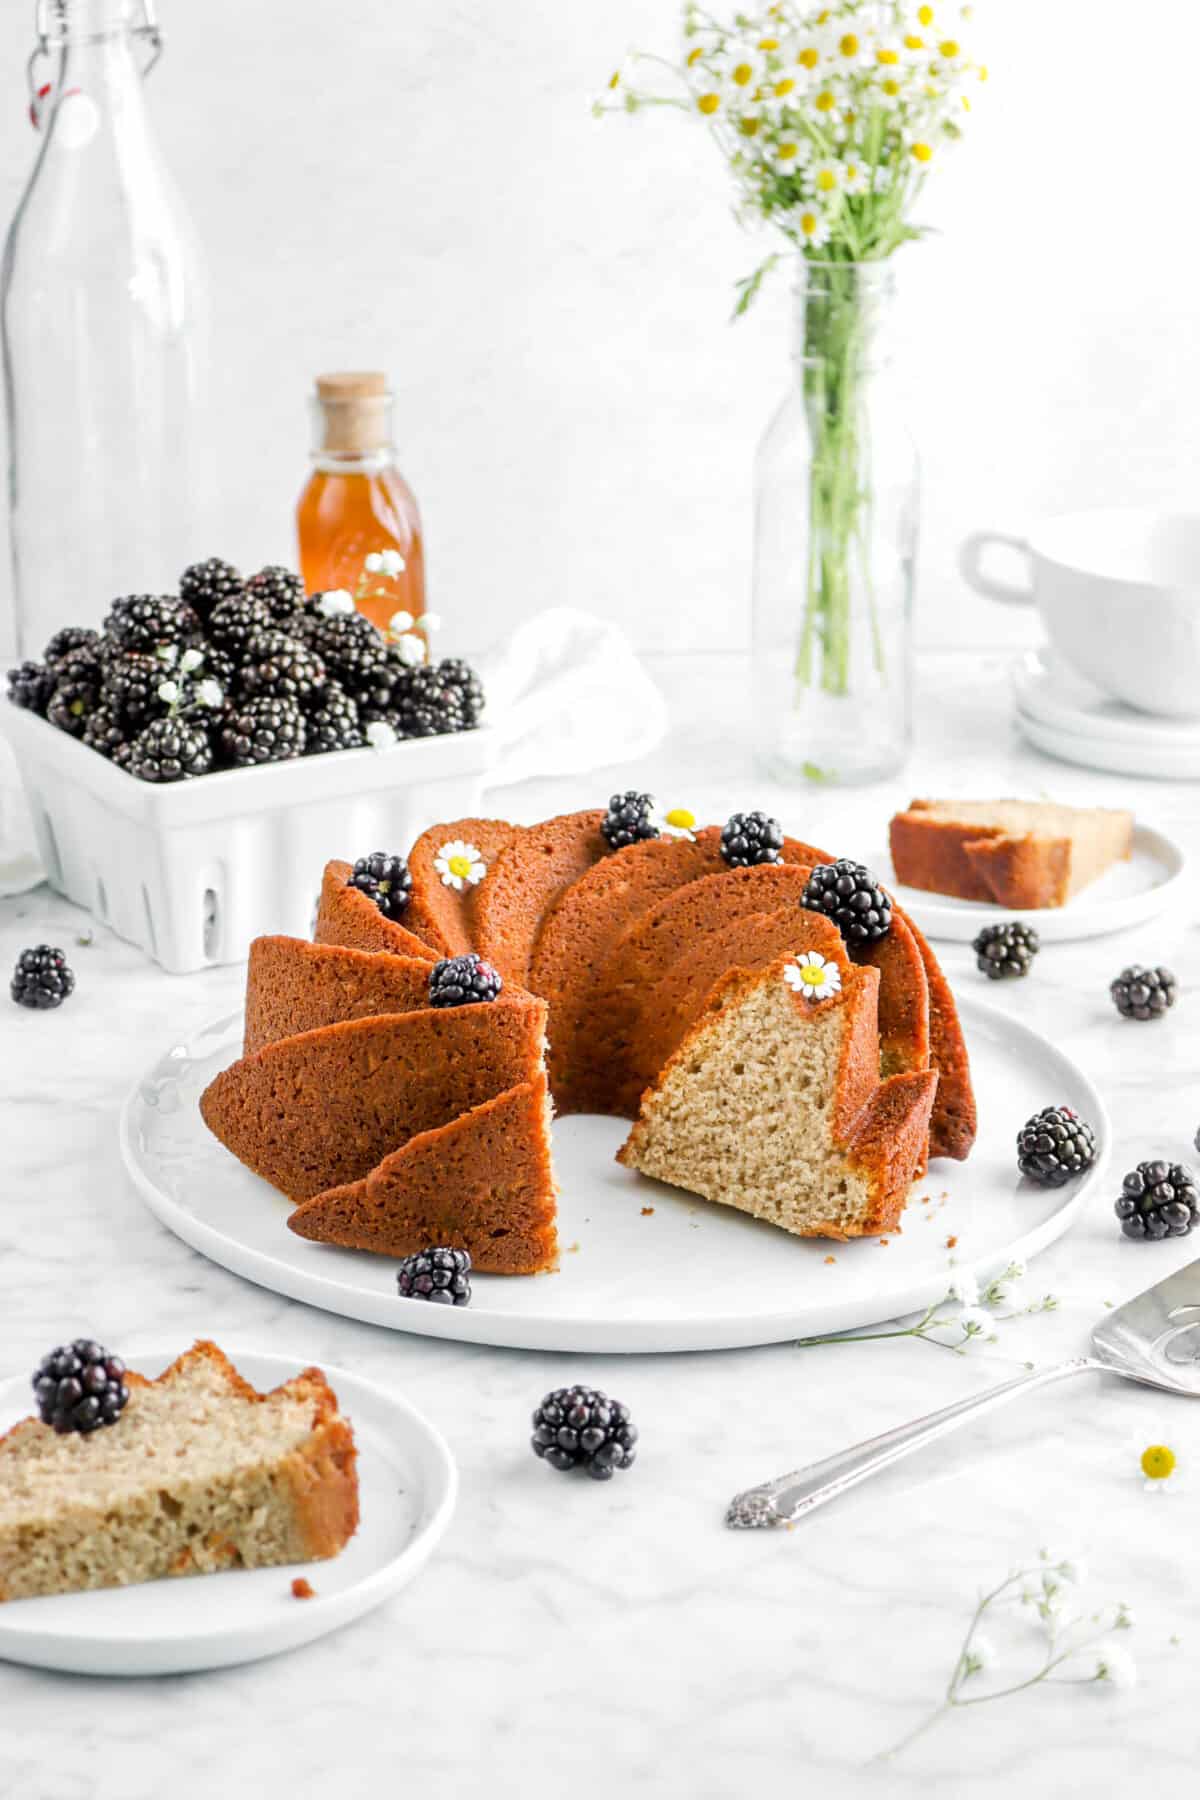 sliced blackberry apple spice cake on white plate with blackberries, flowers, and a jar of honey